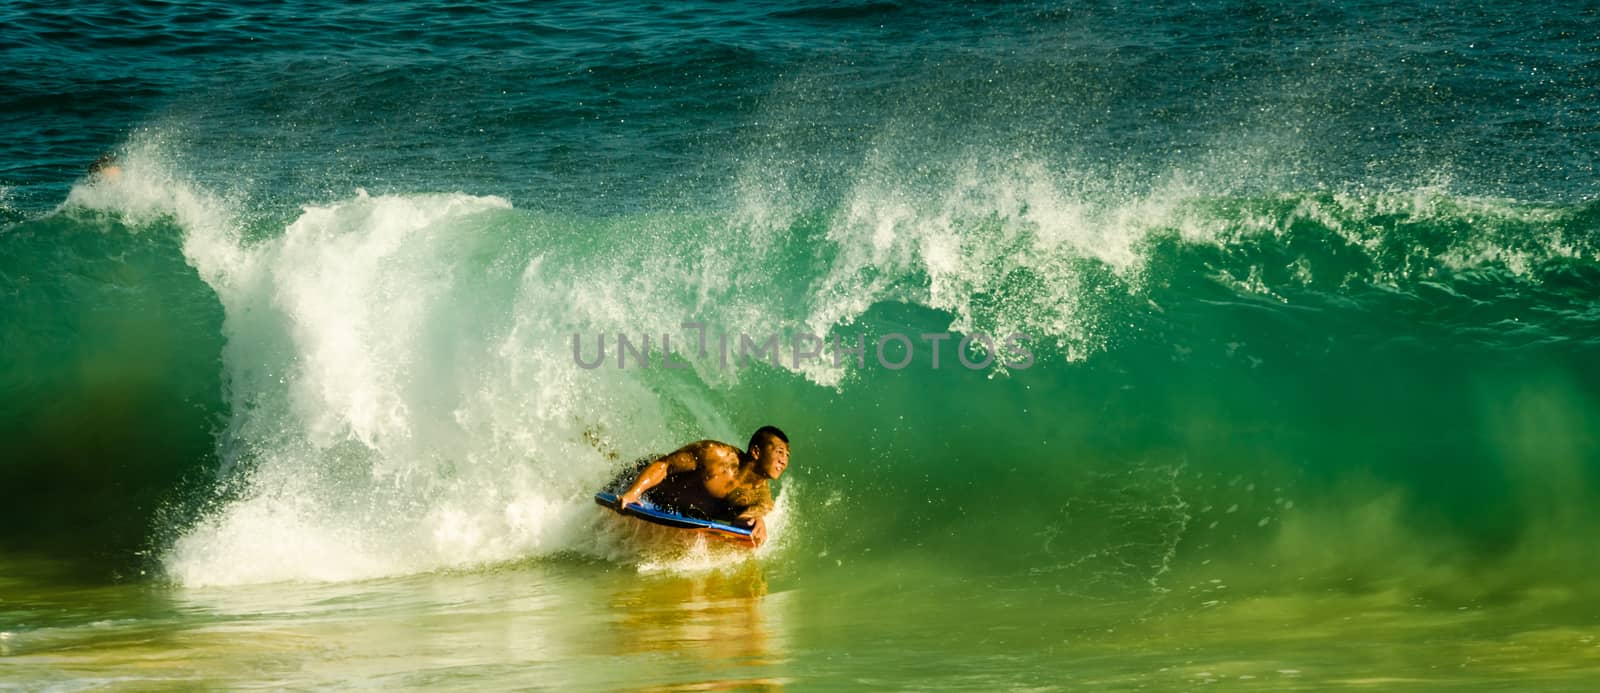 Young man surfs a wave with his short board in Hawaii, US by mikelju